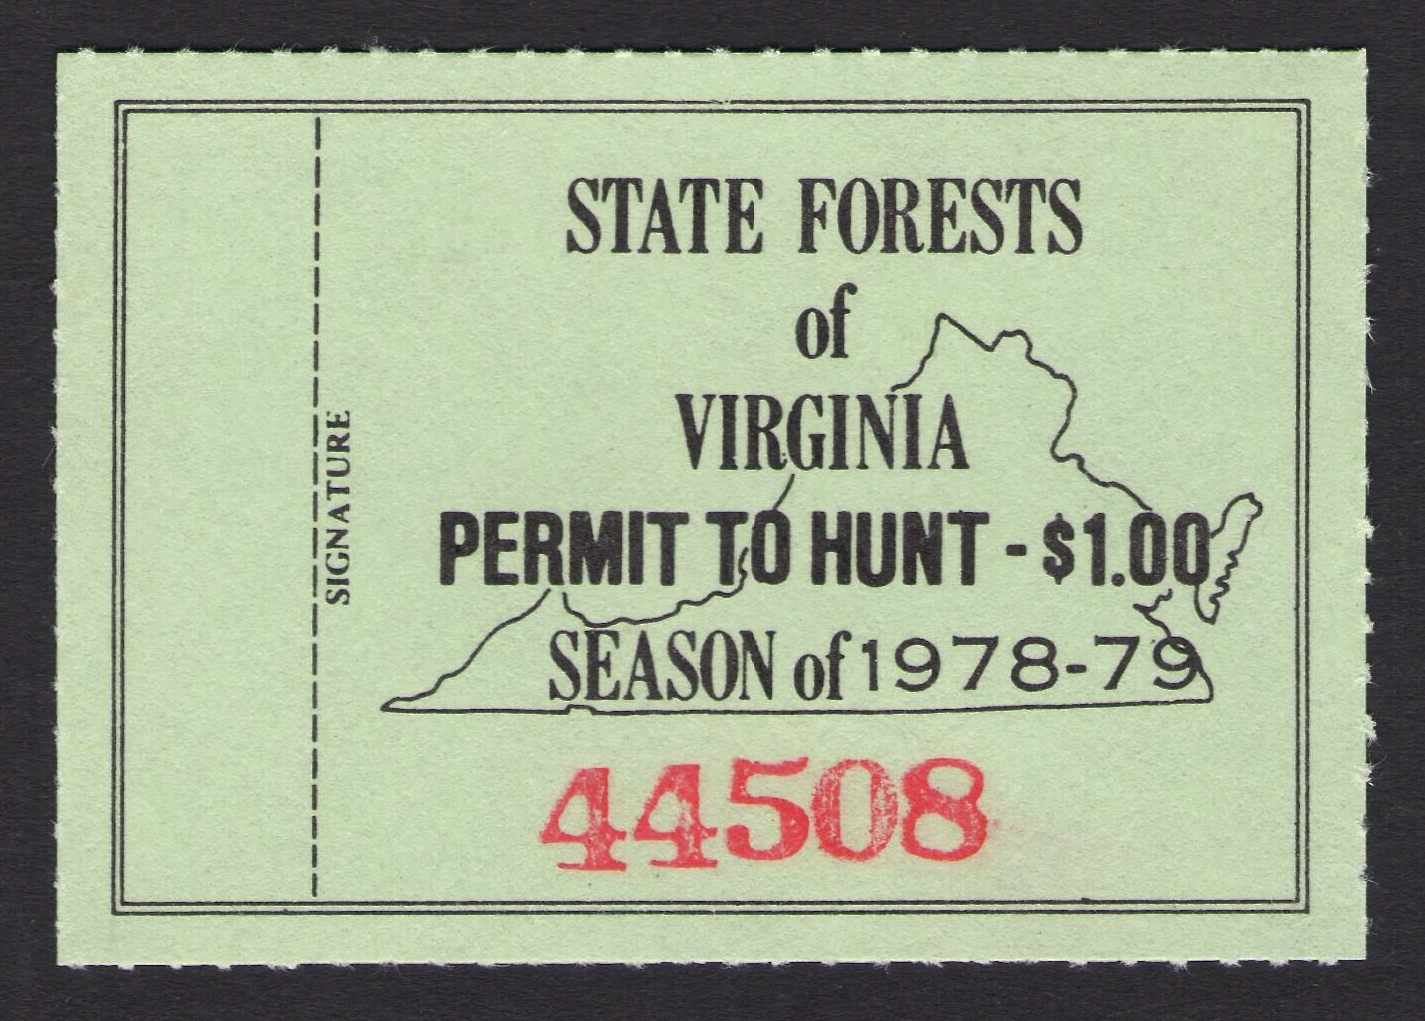 1978-79 Virginia State Forest